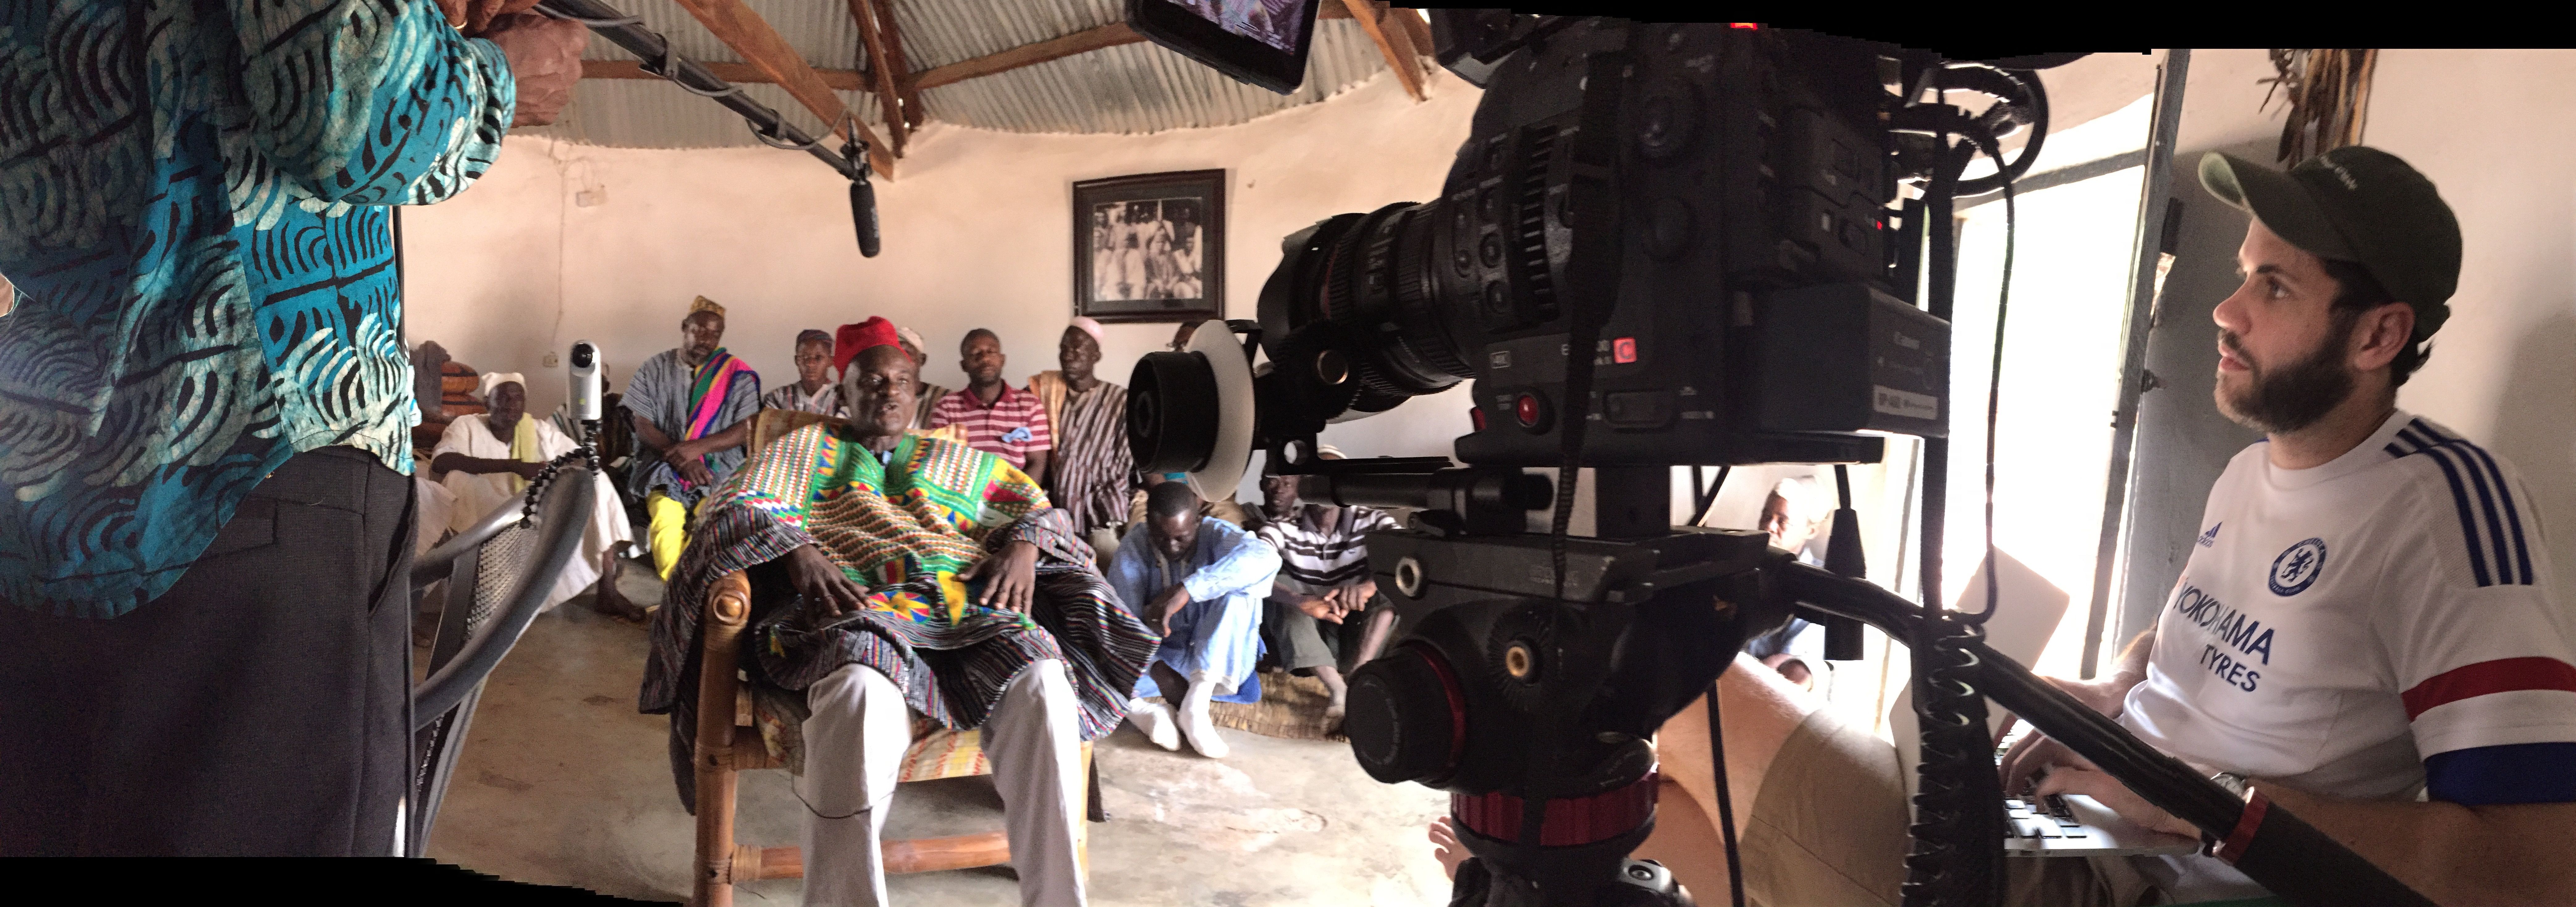 Jonathan Kaiman interviews Chief Wumbe in his palace, surrounded by assemblymen from Bunbong. Image by Noah Fowler. Ghana, 2017.